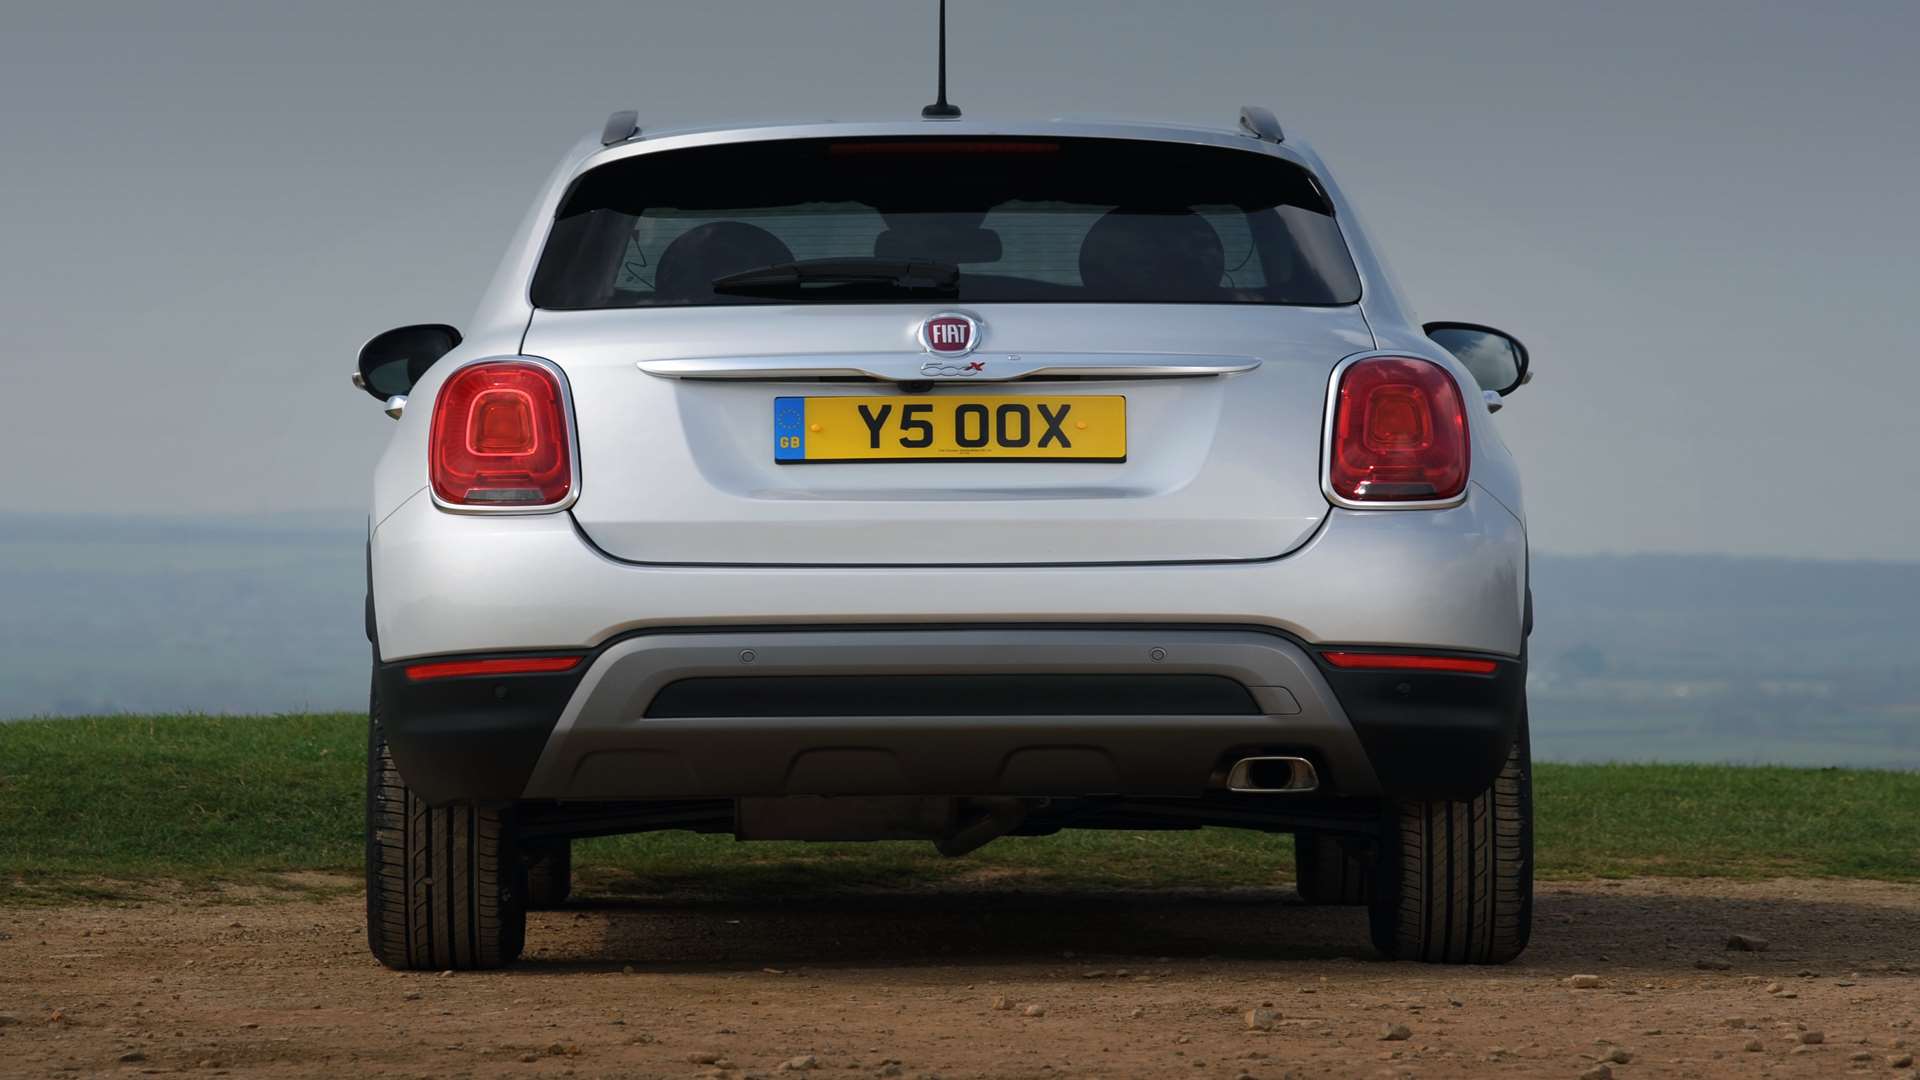 The 500X is good value with a healthy list of standard equipment